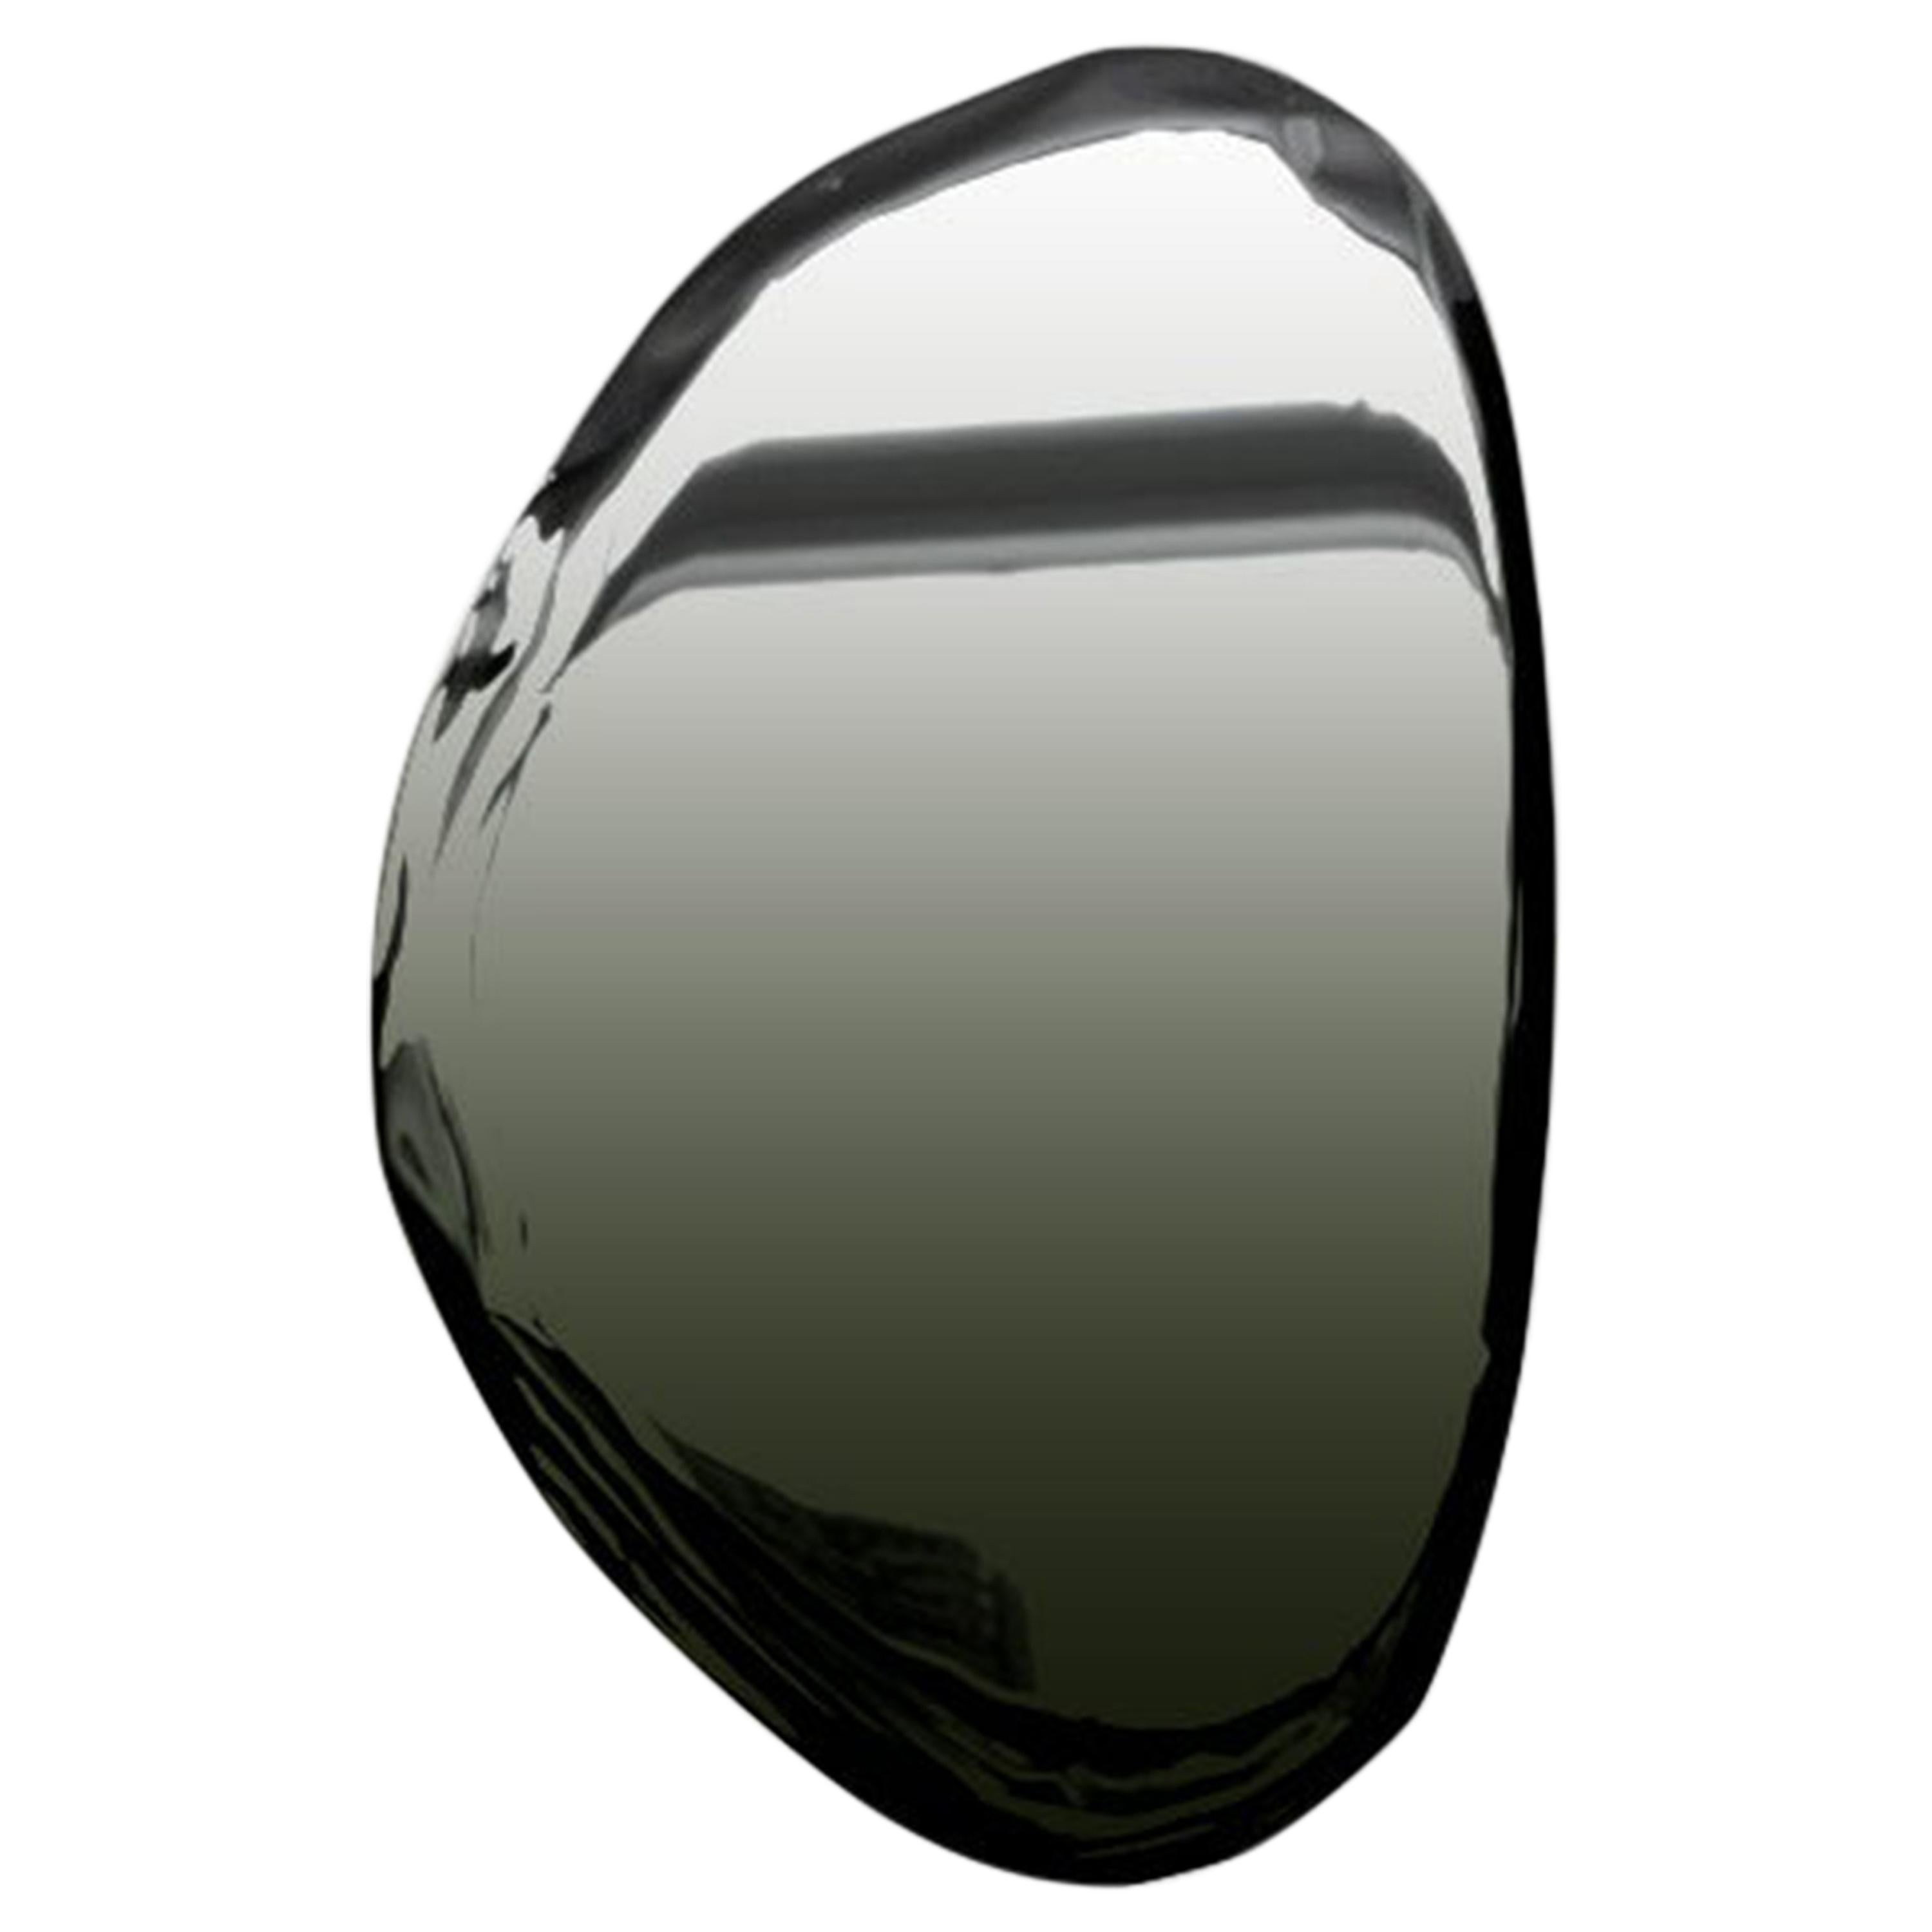 Tafla O2 Polished Dark Matter Color Stainless Steel Wall Mirror by Zieta